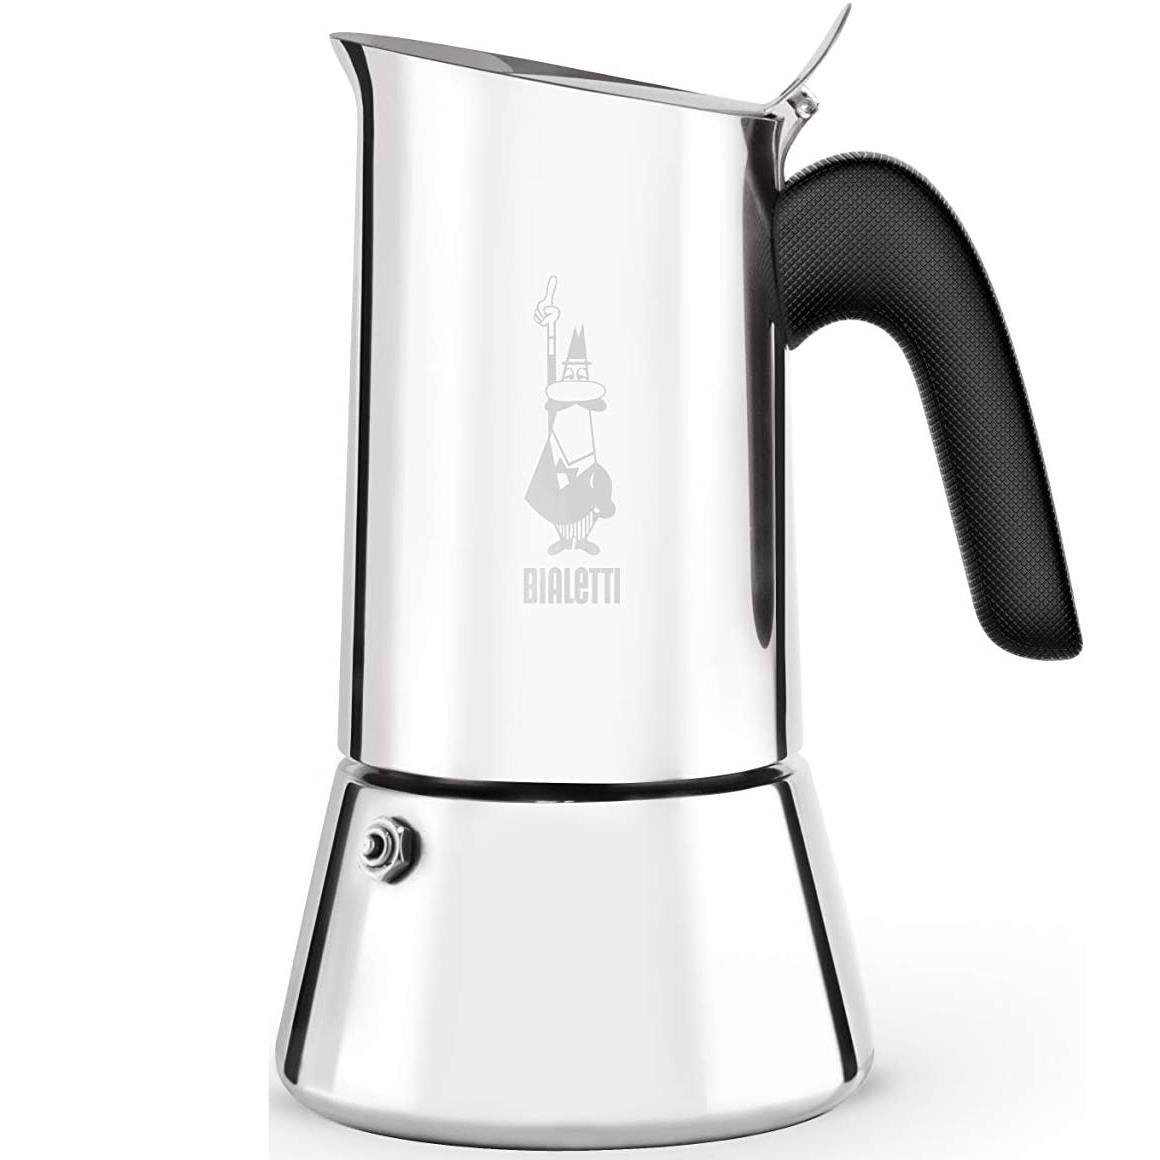 Bialetti Venus 2 Cup Stovetop Espresso Coffee Maker, Stainless